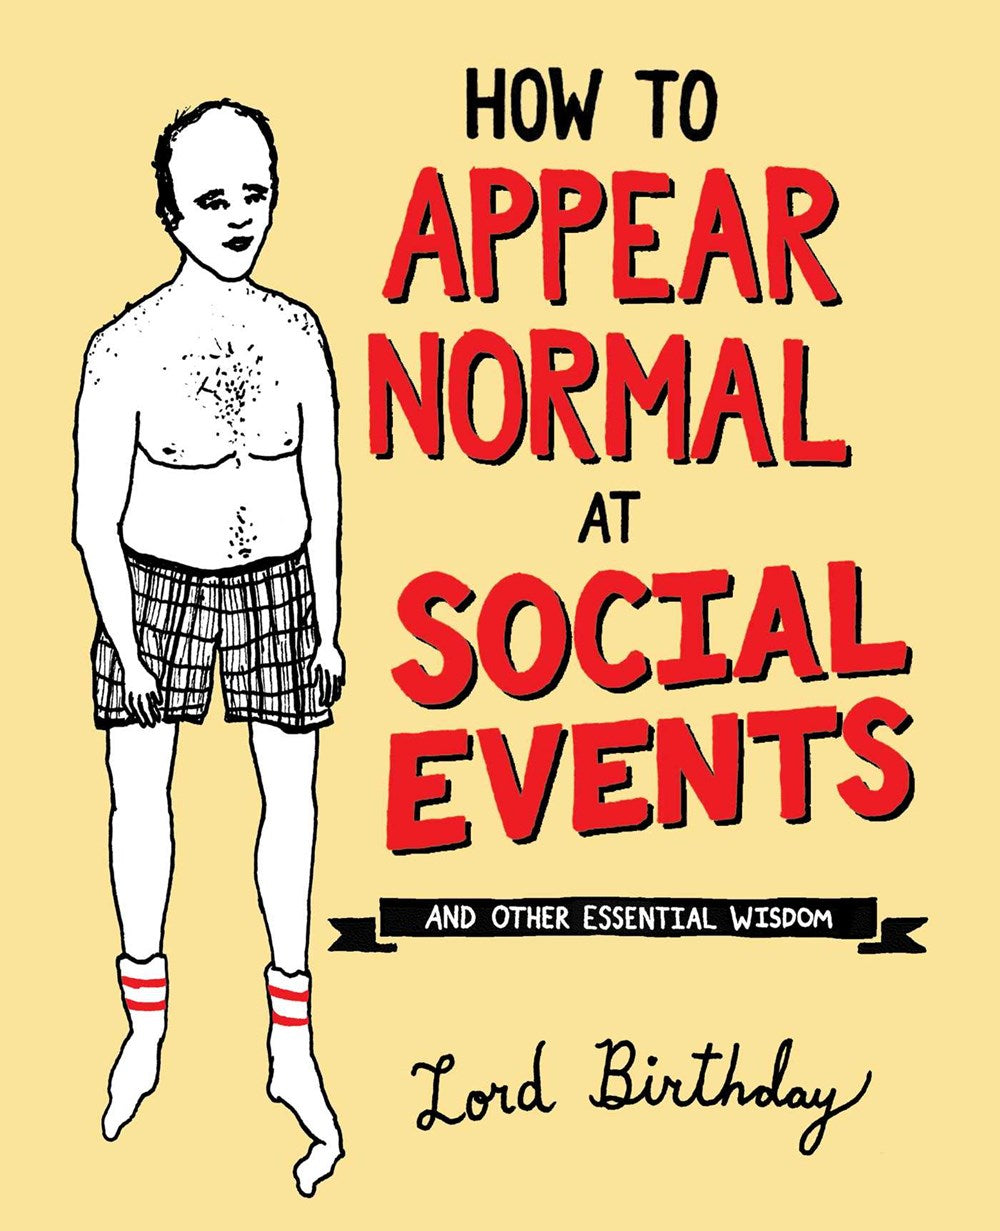 Man in boxers wearing socks, How to Appear Normal at Social Events : And Other Essential Wisdom, Lord Birthday